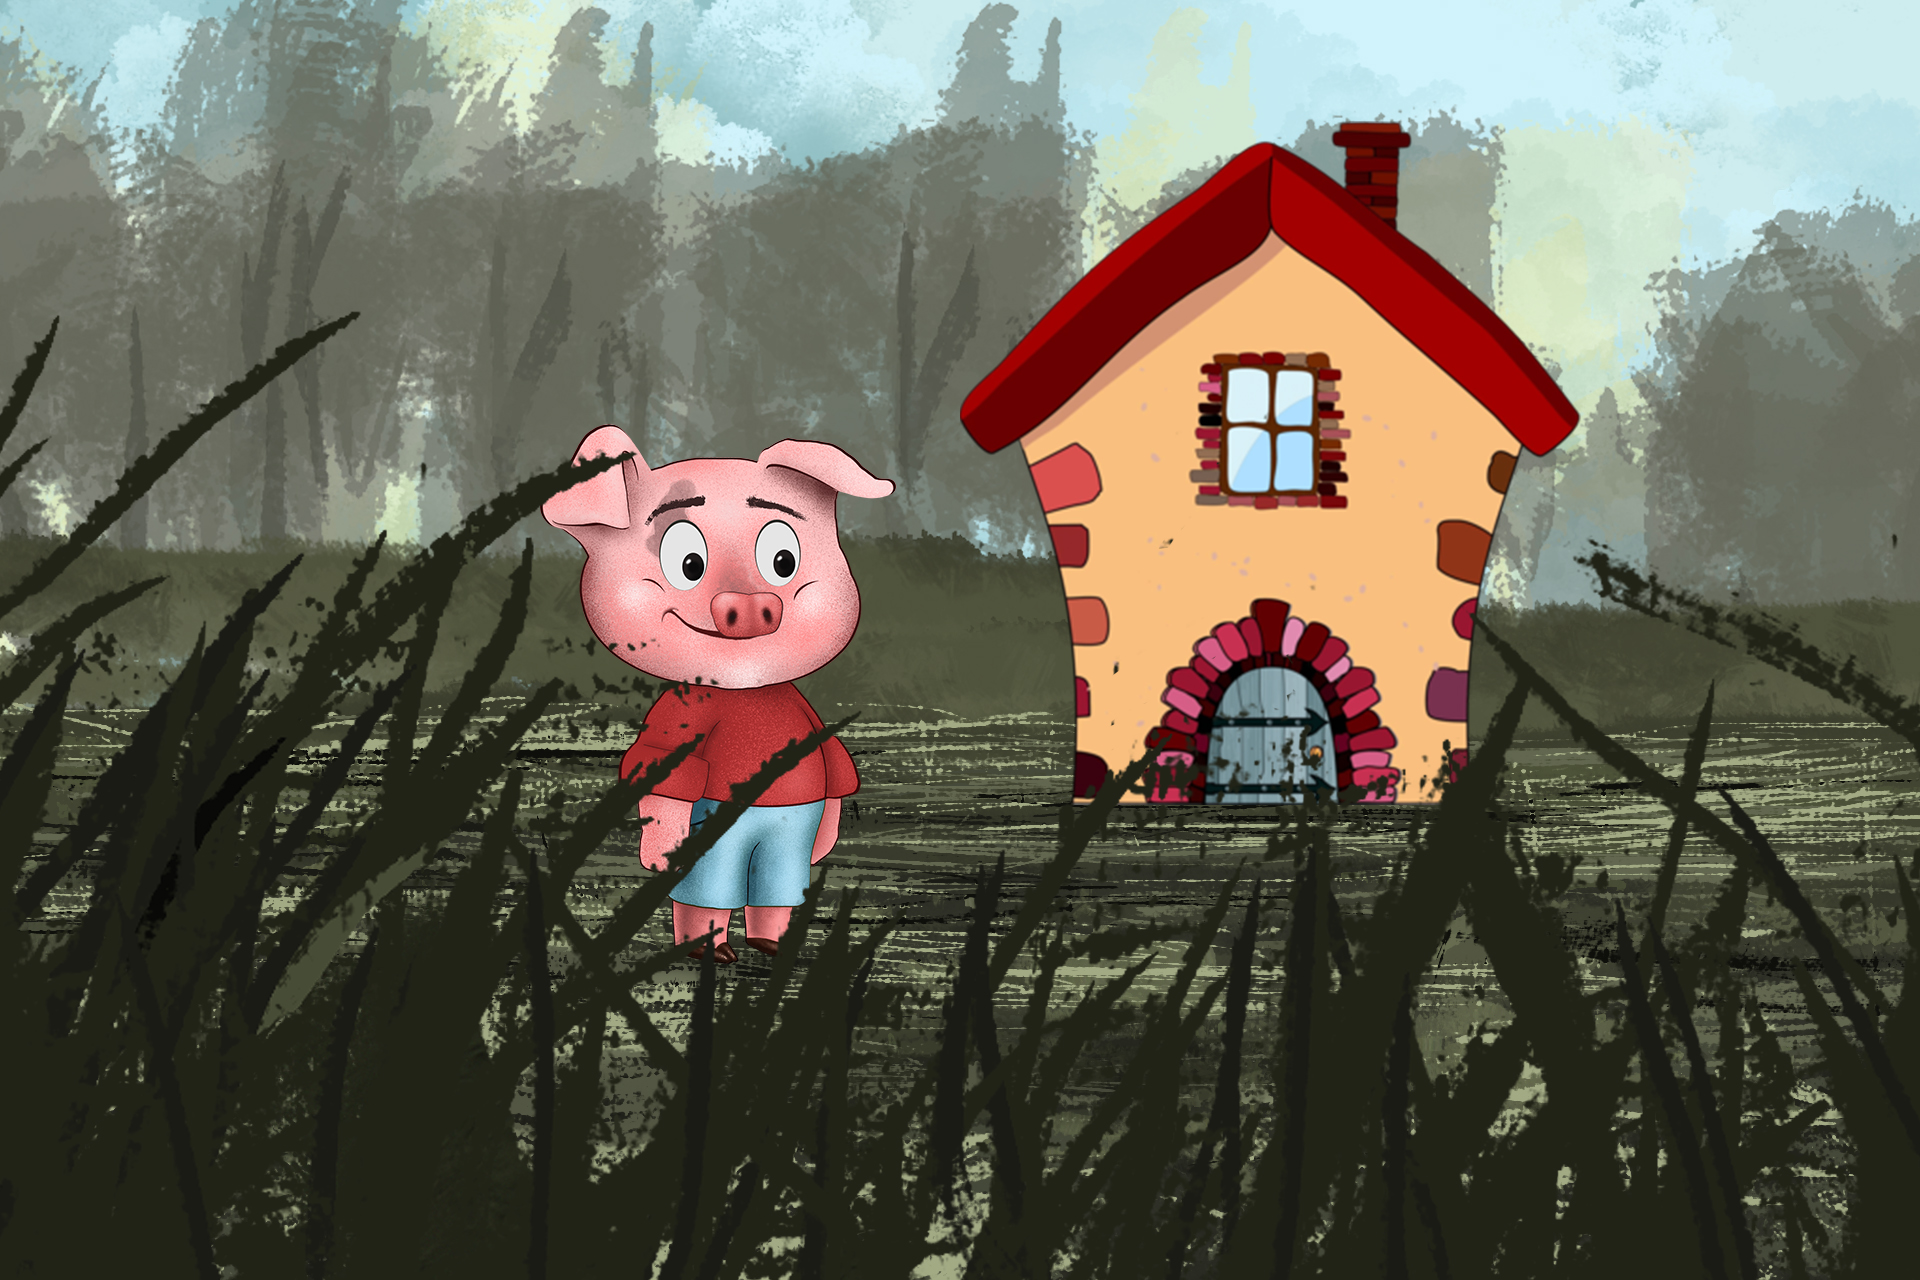 Three Little Pigs against the scam